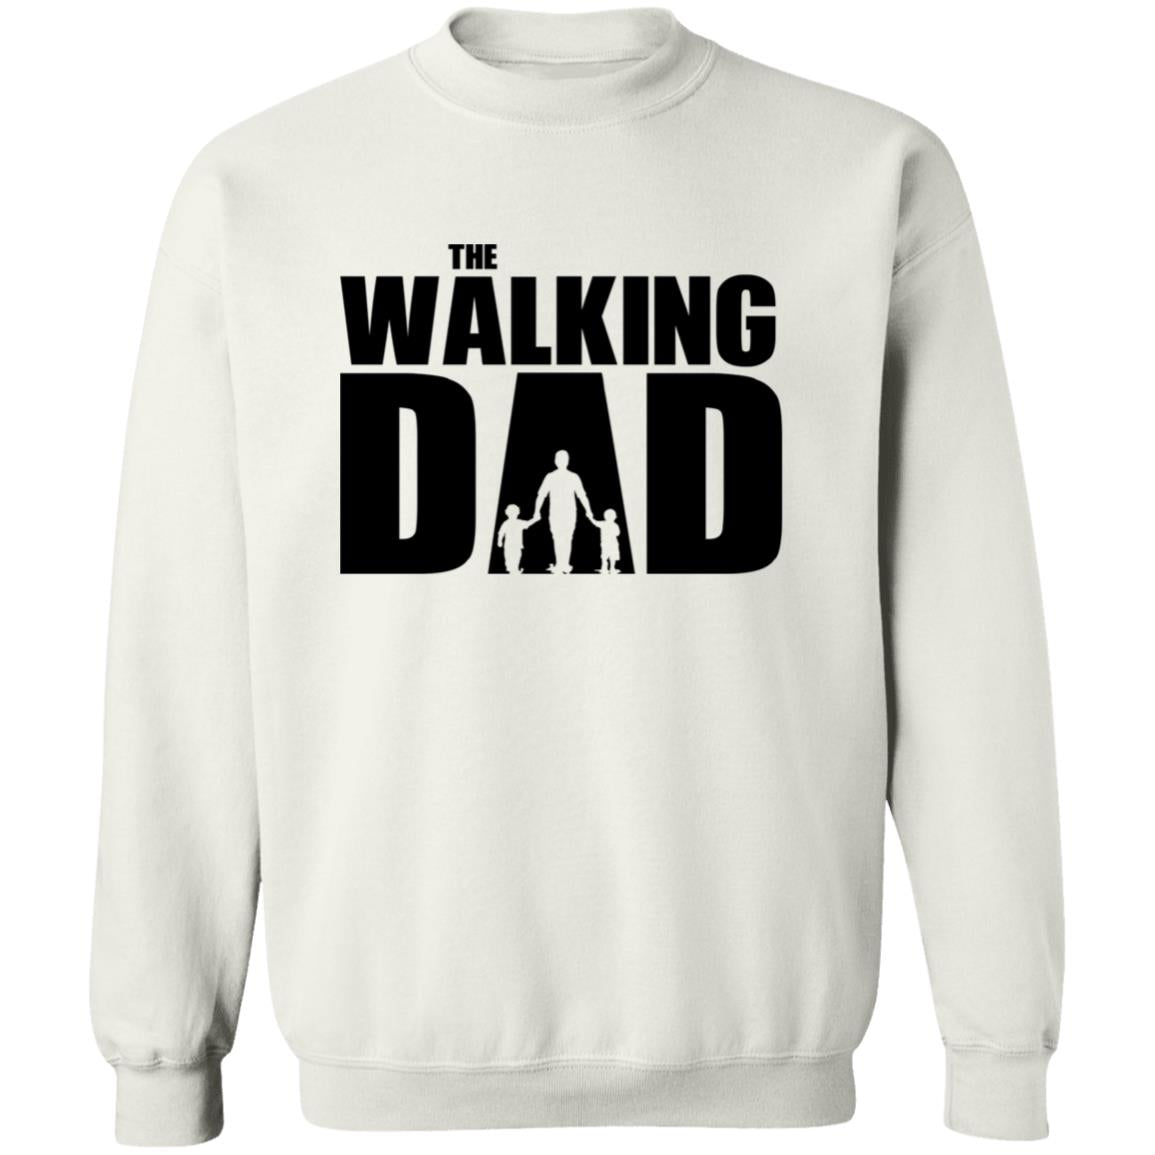 The Walking Dad of 2